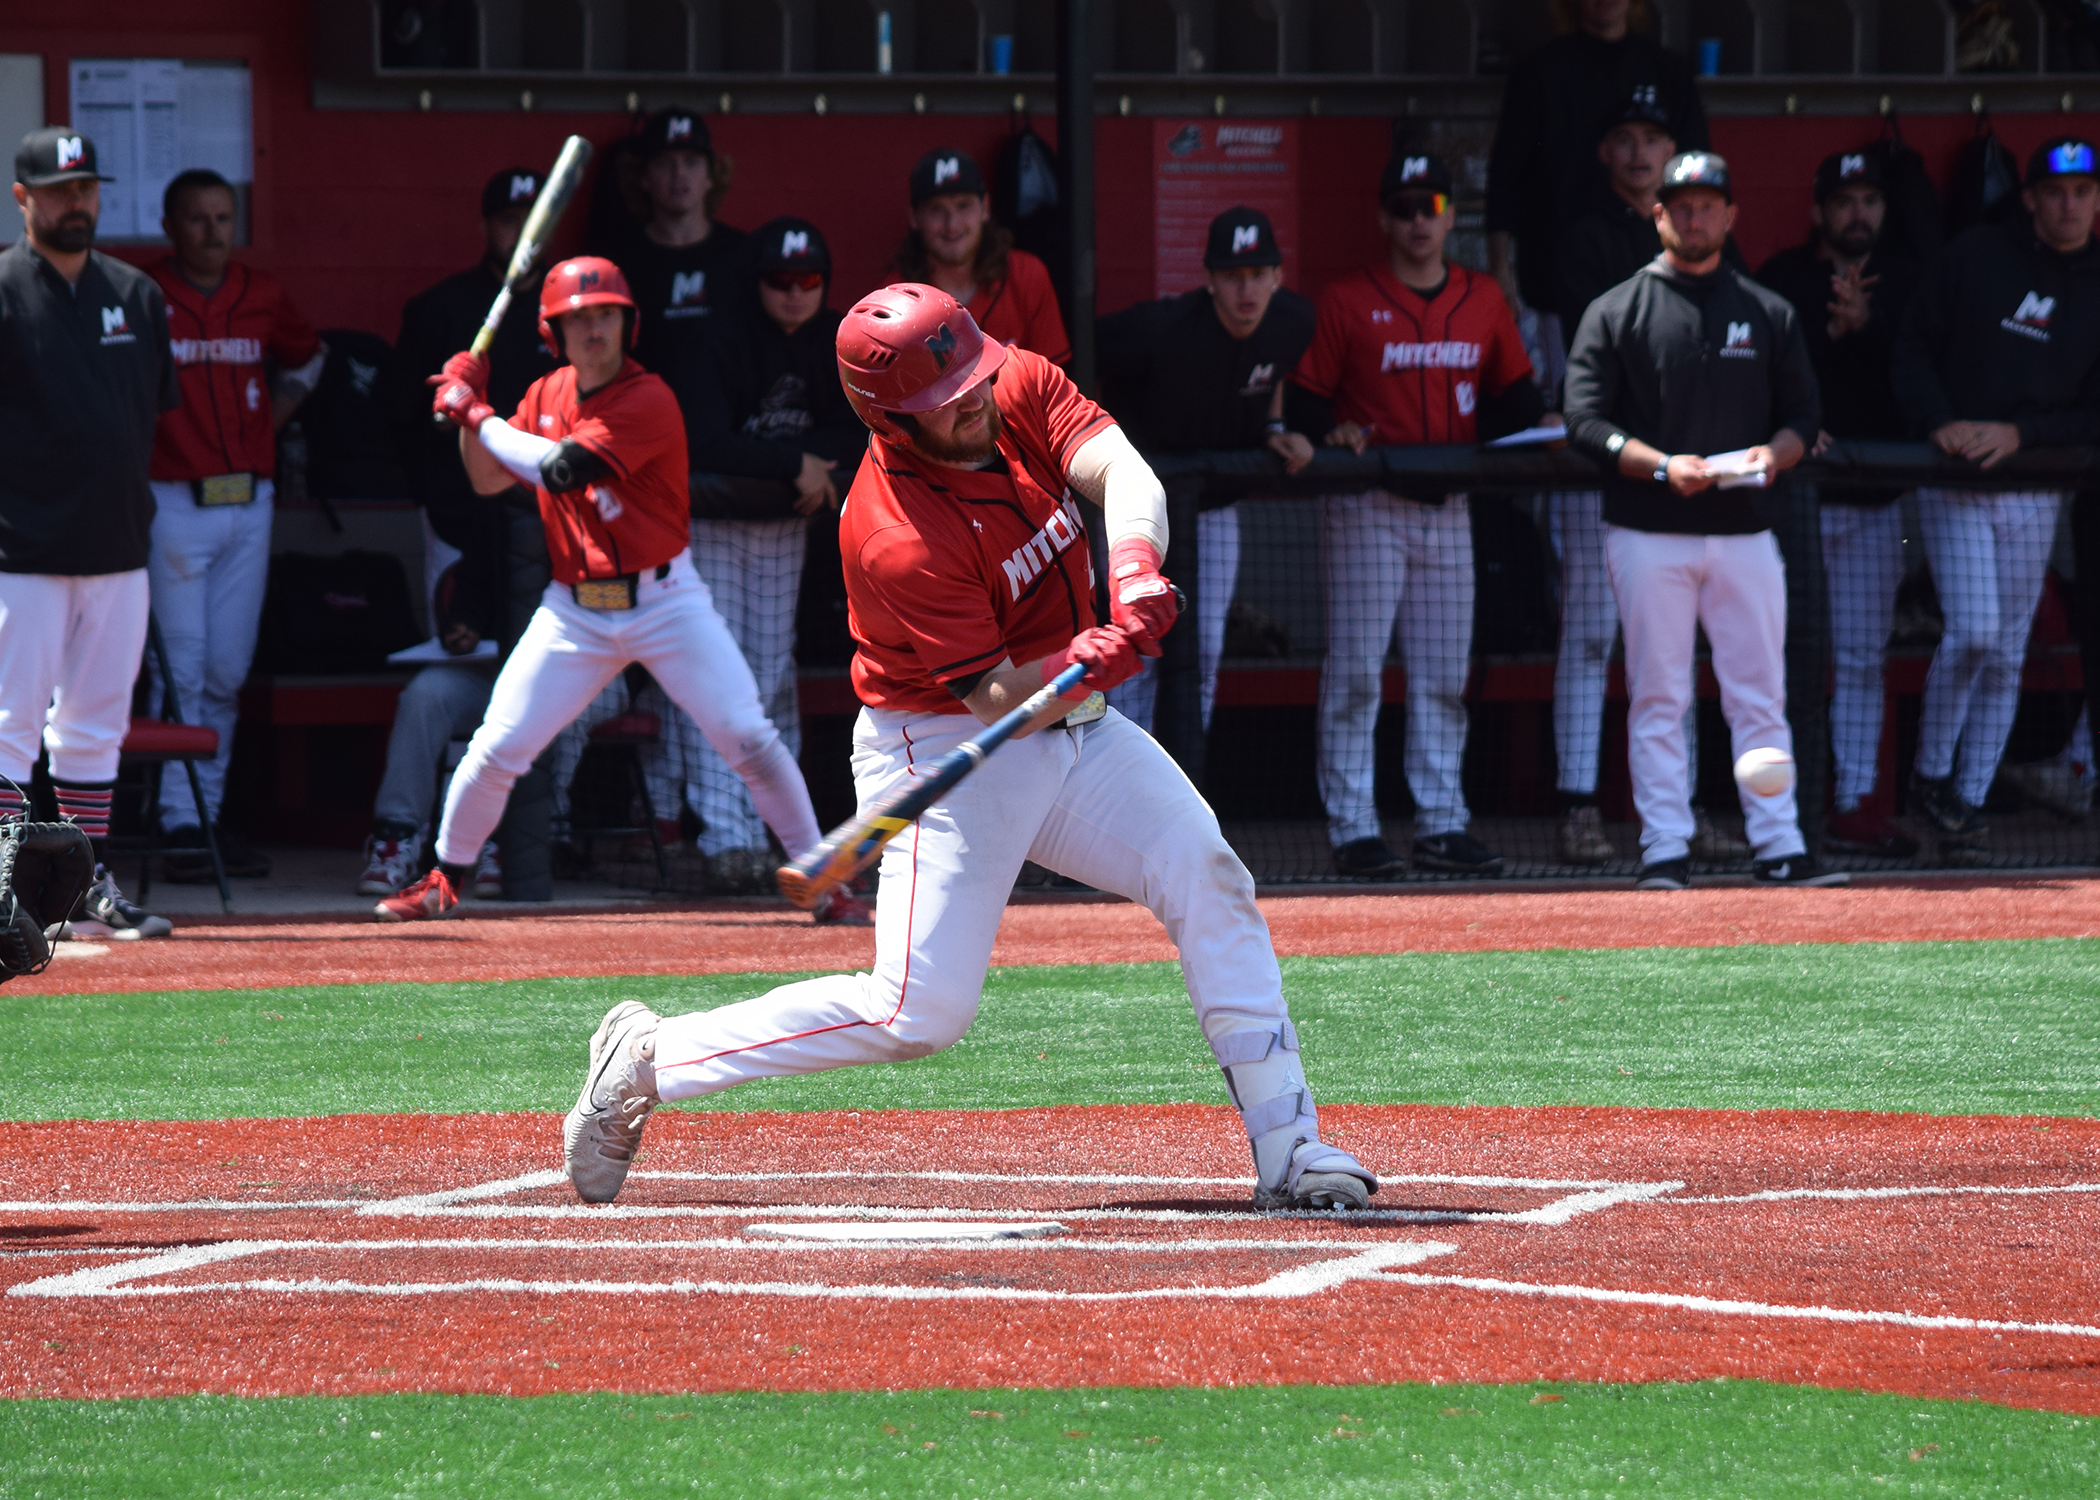 Baseball Rallies from Five Run Deficit to Advance Past Colby-Sawyer